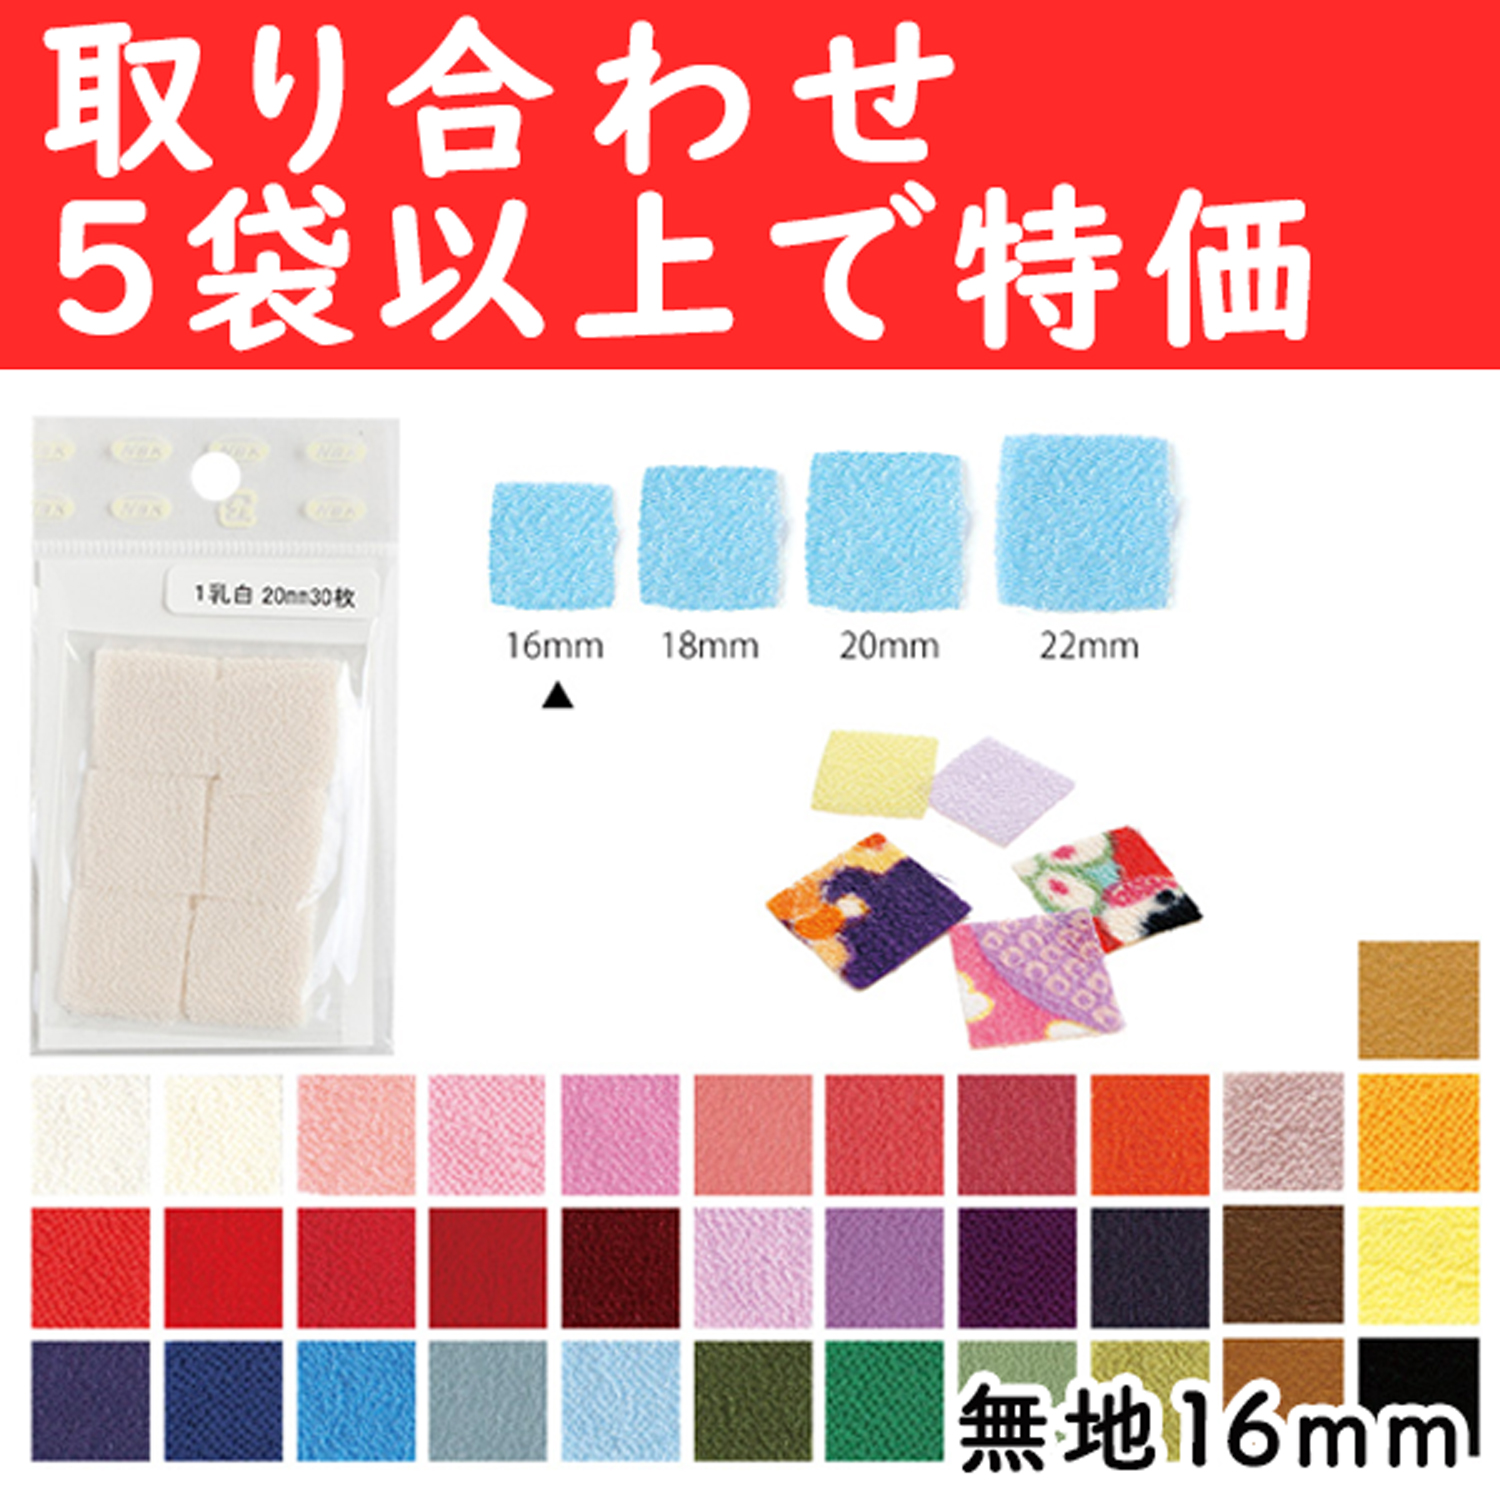 S50CH16-OVER5 Tsumami Crafting Crepe 16mm 30pcs over 5 pack more (pack)